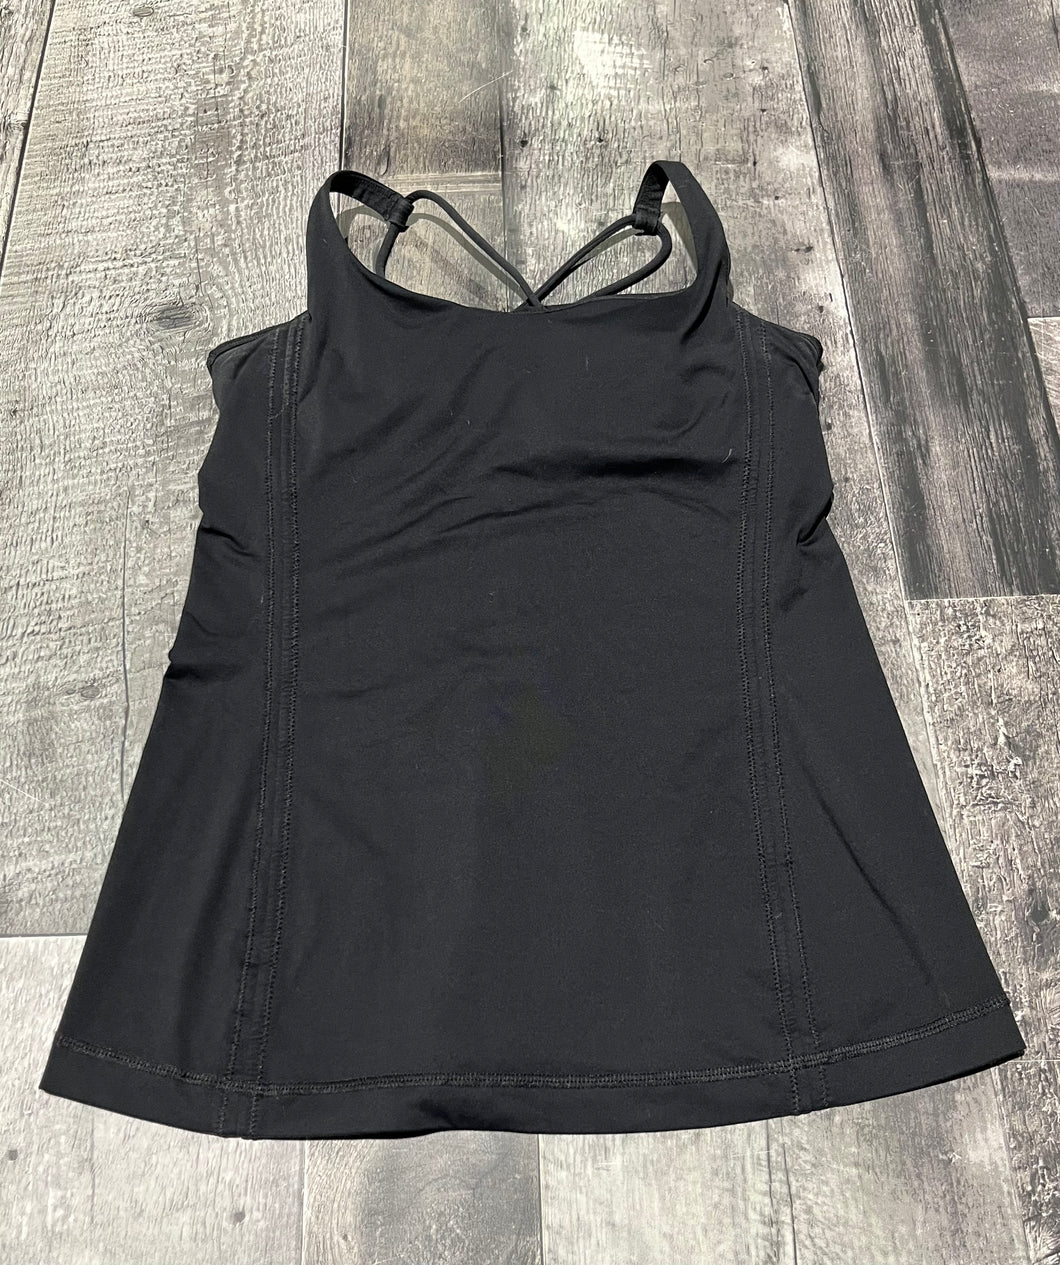 Lululemon black top - Hers no size approx 6